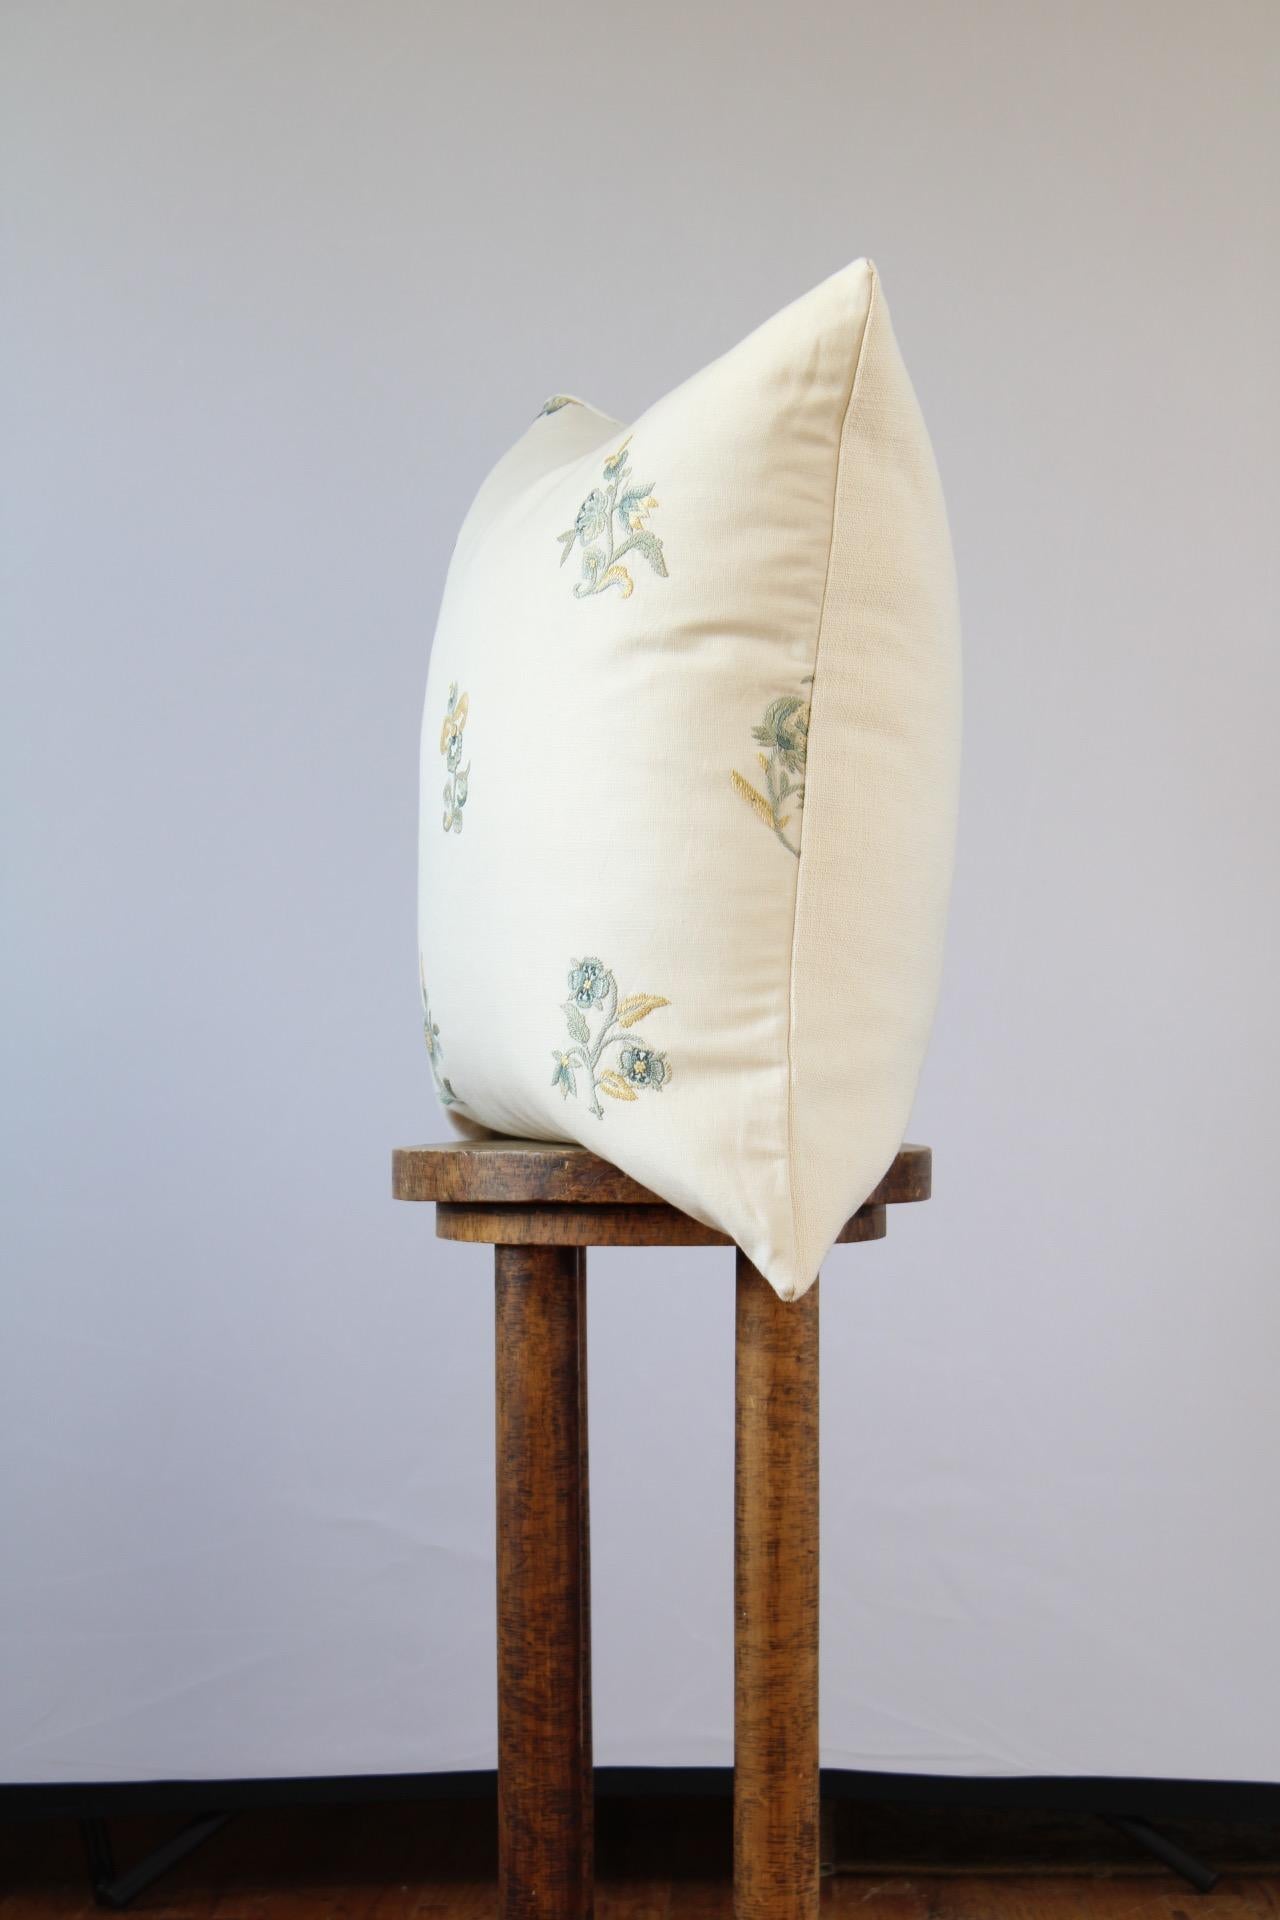 Dimensions: 22” x 22” 

Pillow front: gold & blue green embroidered flowers / pillow back: off white cotton

Our pillows are designed by Vantage Design and hand-sewn in Bozeman, MT by local seamstresses. Each one of our pillows includes our